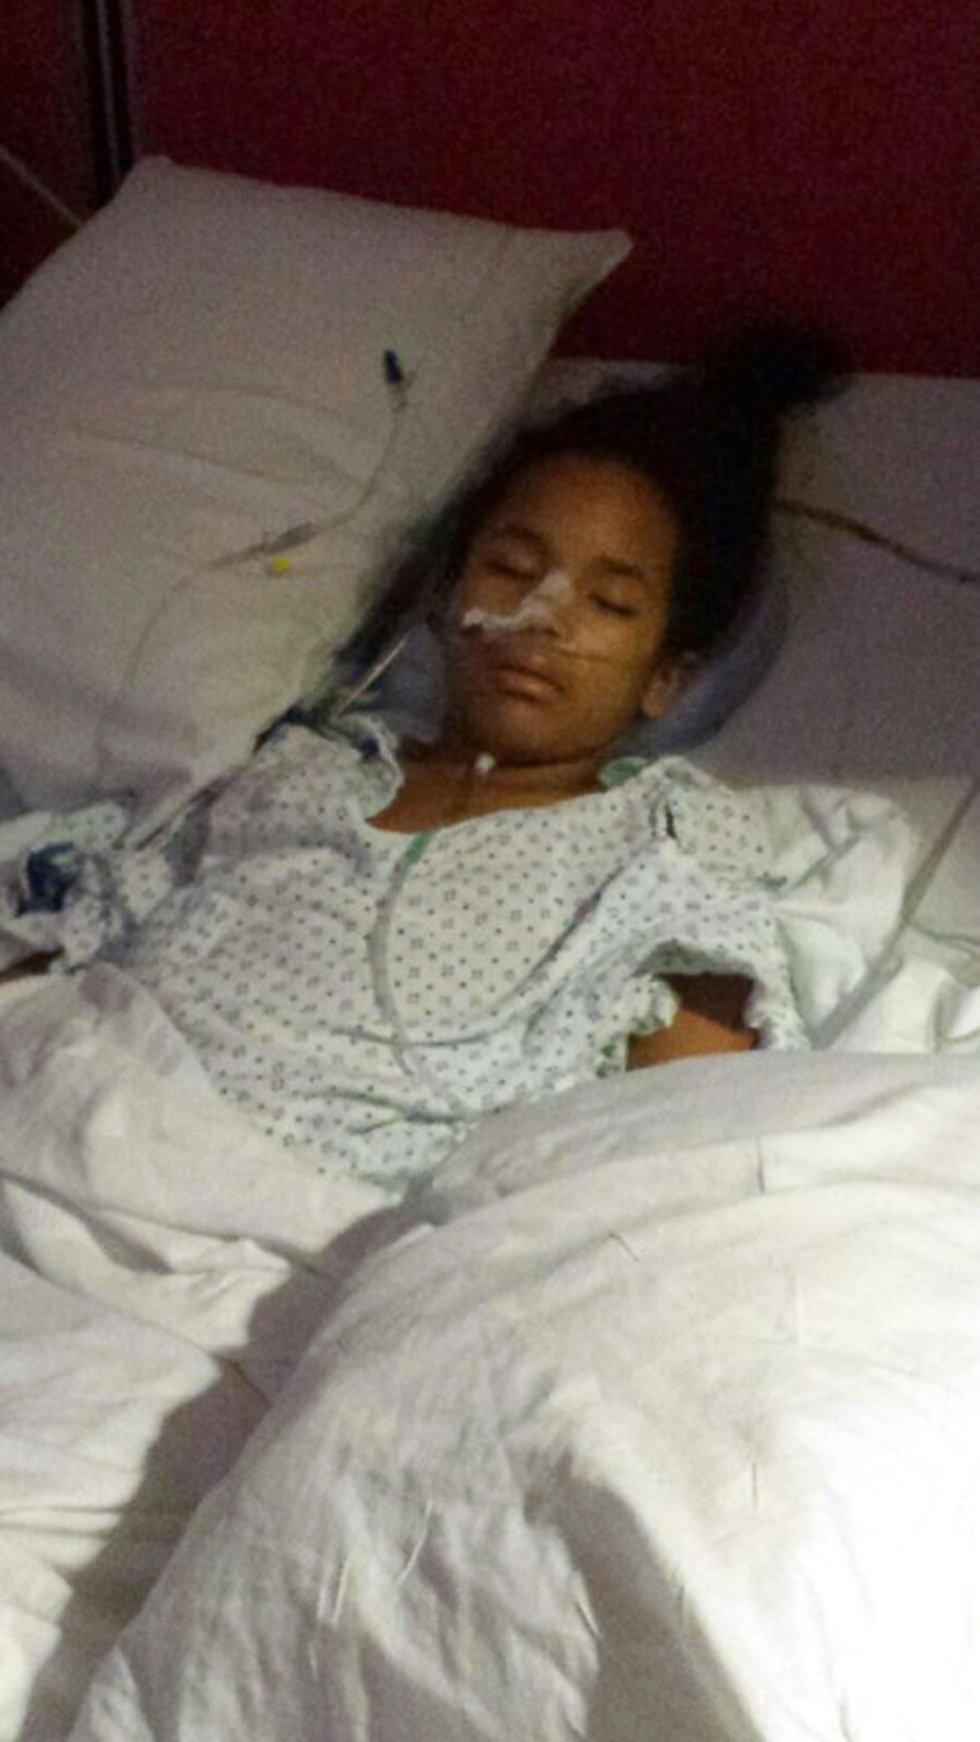 PHOTO: Journee underwent a 10-hour surgery, but the tumor wasn't cancerous.